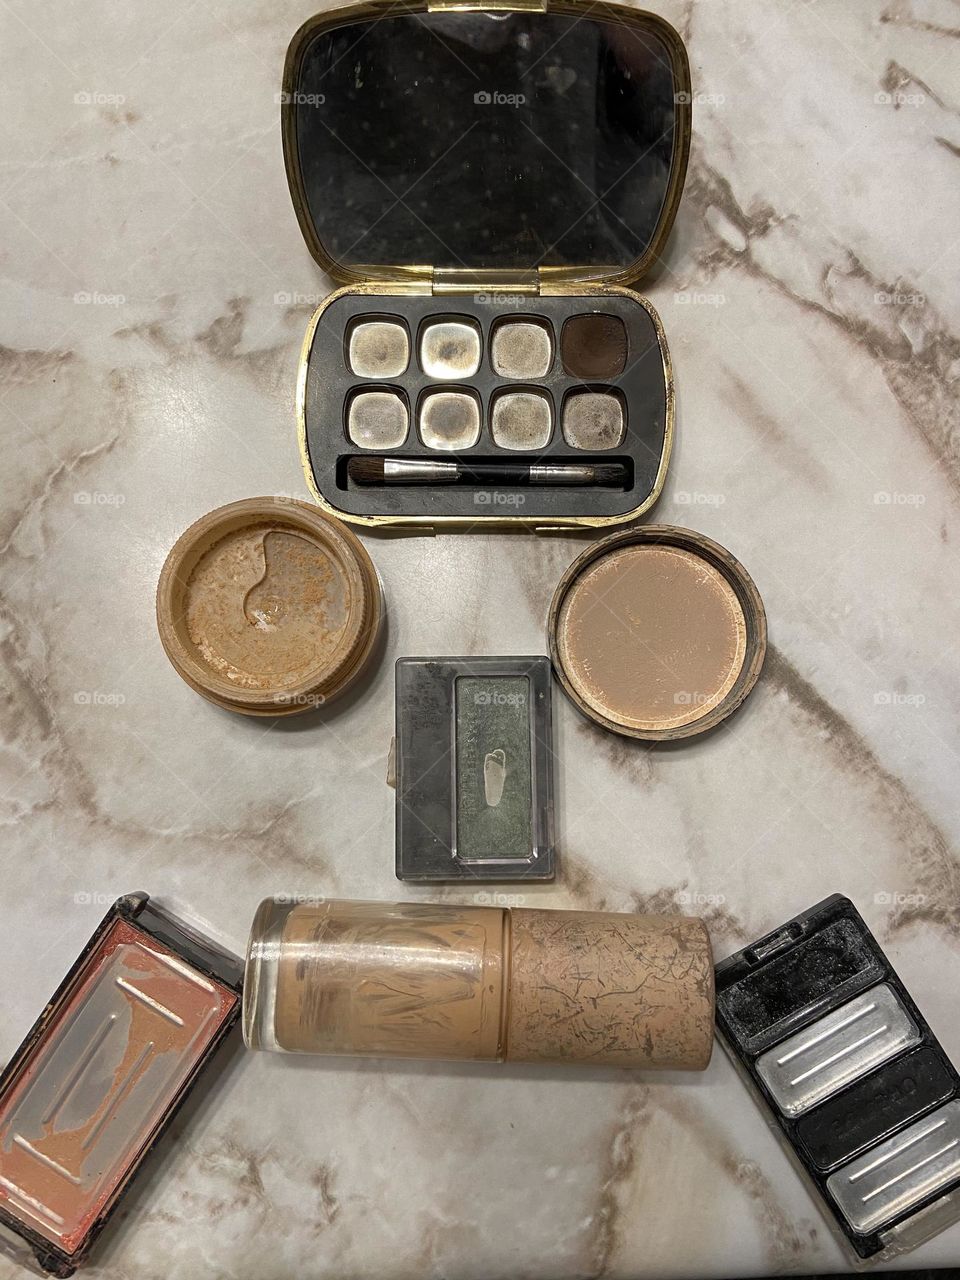 A “sad face” made of my collection of empty and almost- empty makeup containers. On the plus side, I use what I buy. On the minus side, I sometimes run out before I can afford to buy more but that just makes it sweeter when I can. 